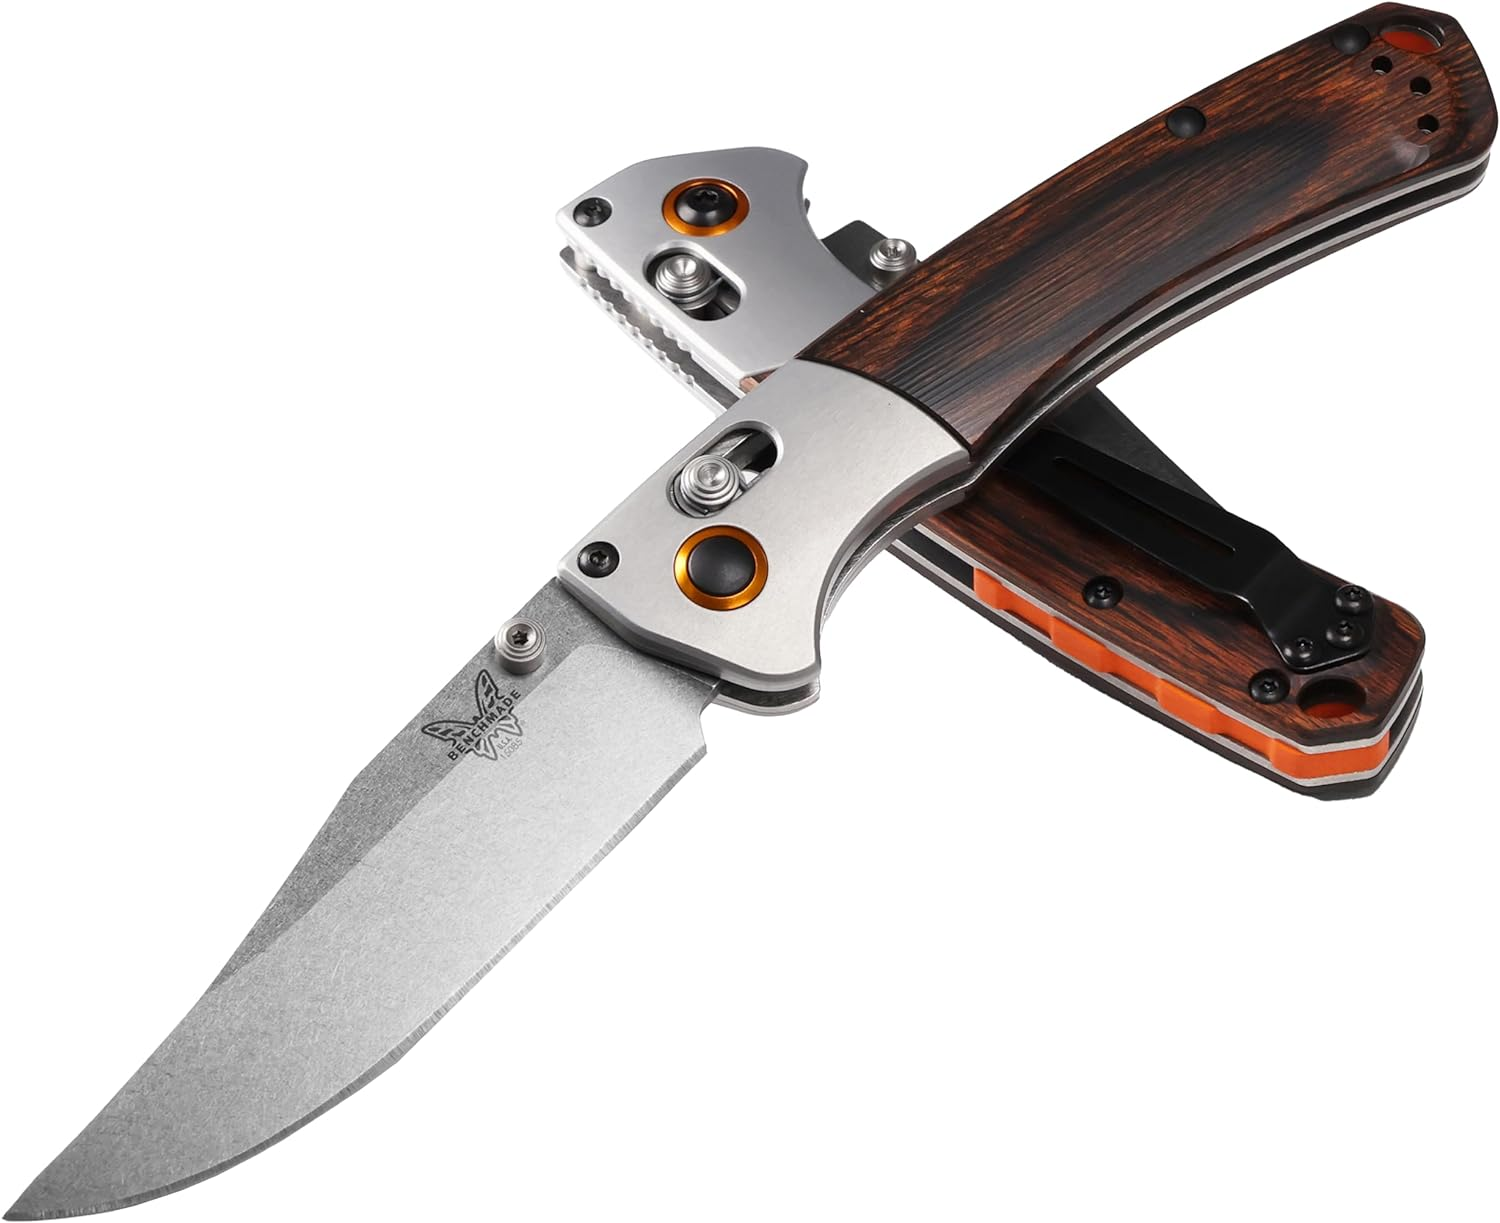 Benchmade - Mini Crooked River 15085 EDC Knife with Dark Brown Wood Handle (15085-2)